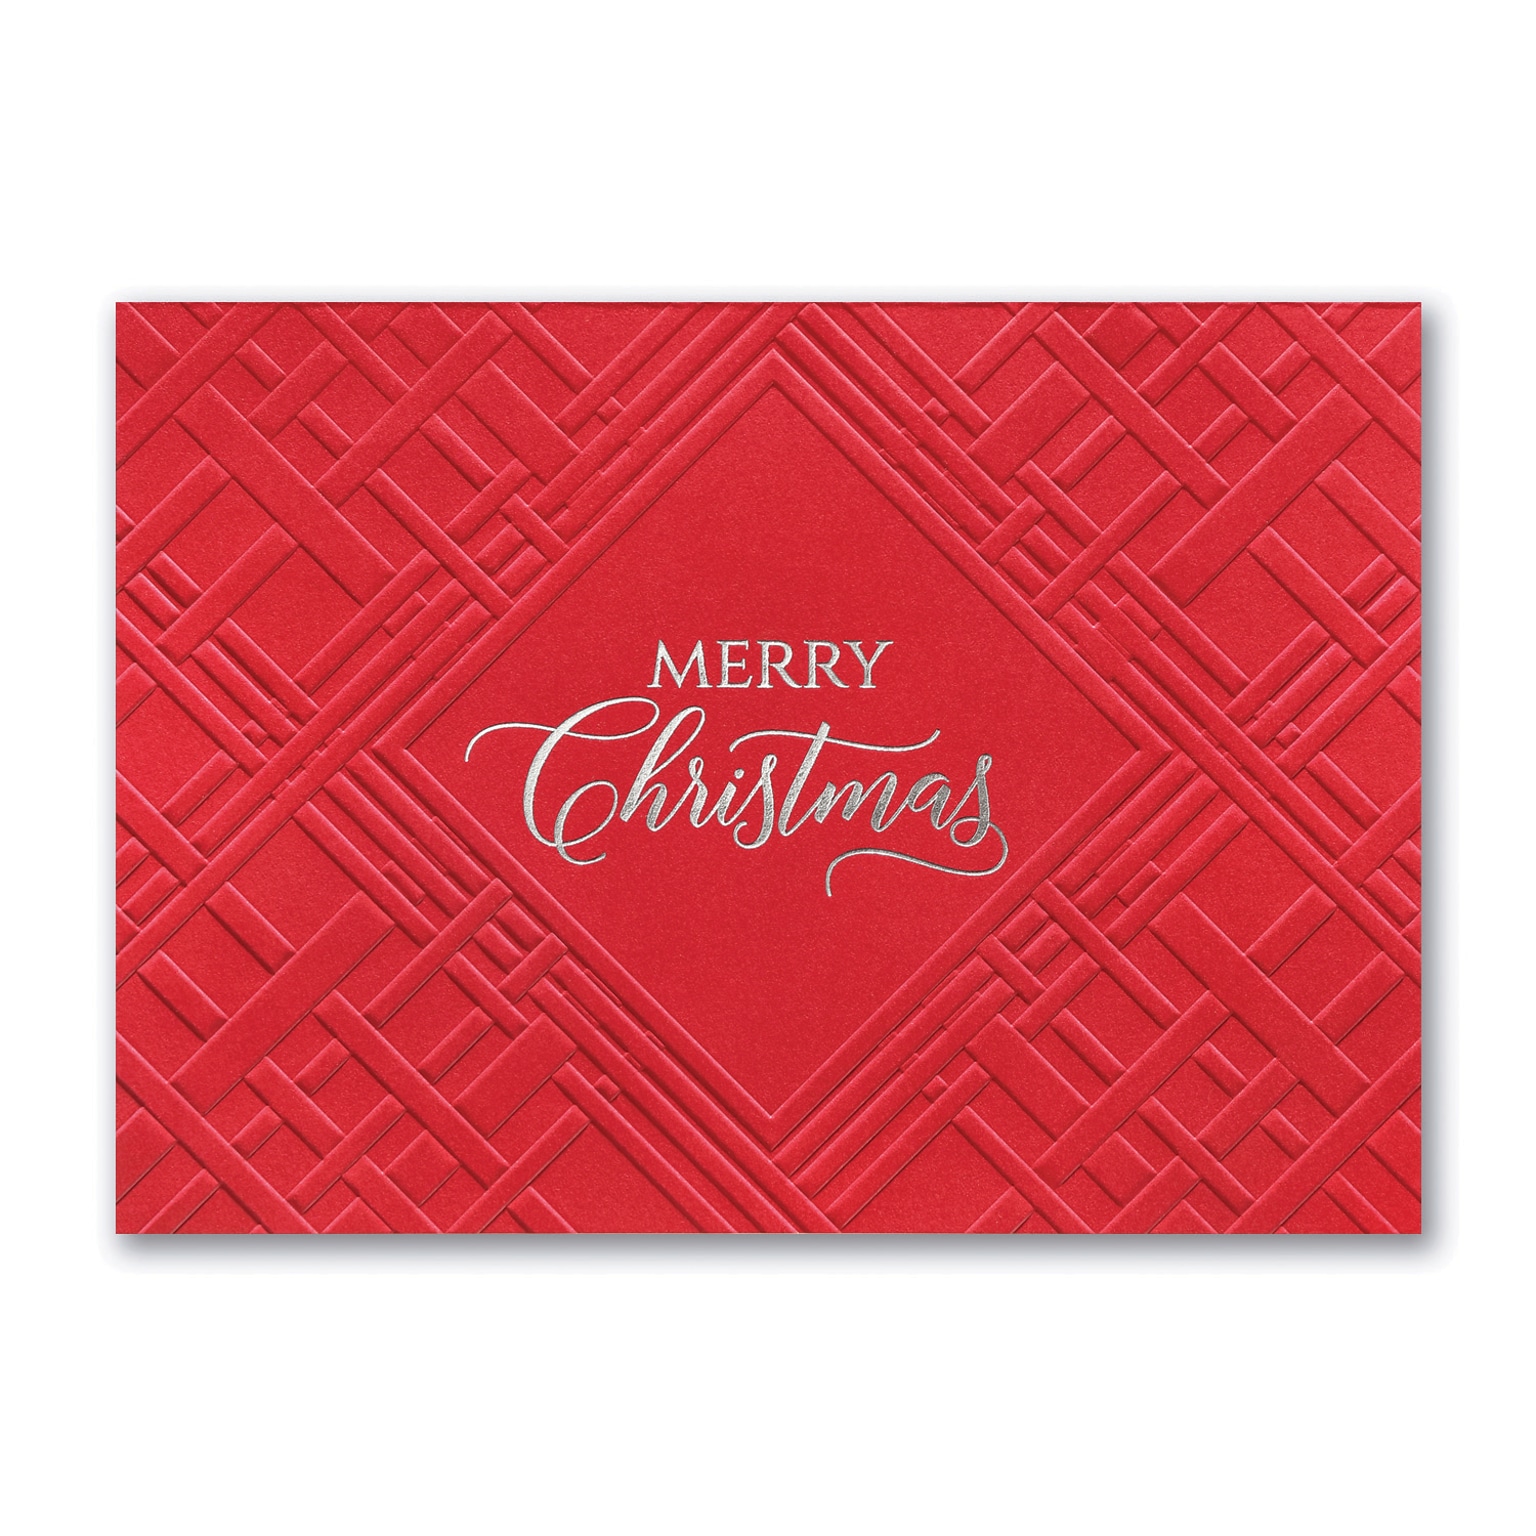 Custom Scarlet Christmas Cards, with Envelopes, 7 7/8 x 5 5/8  Holiday Card, 25 Cards per Set